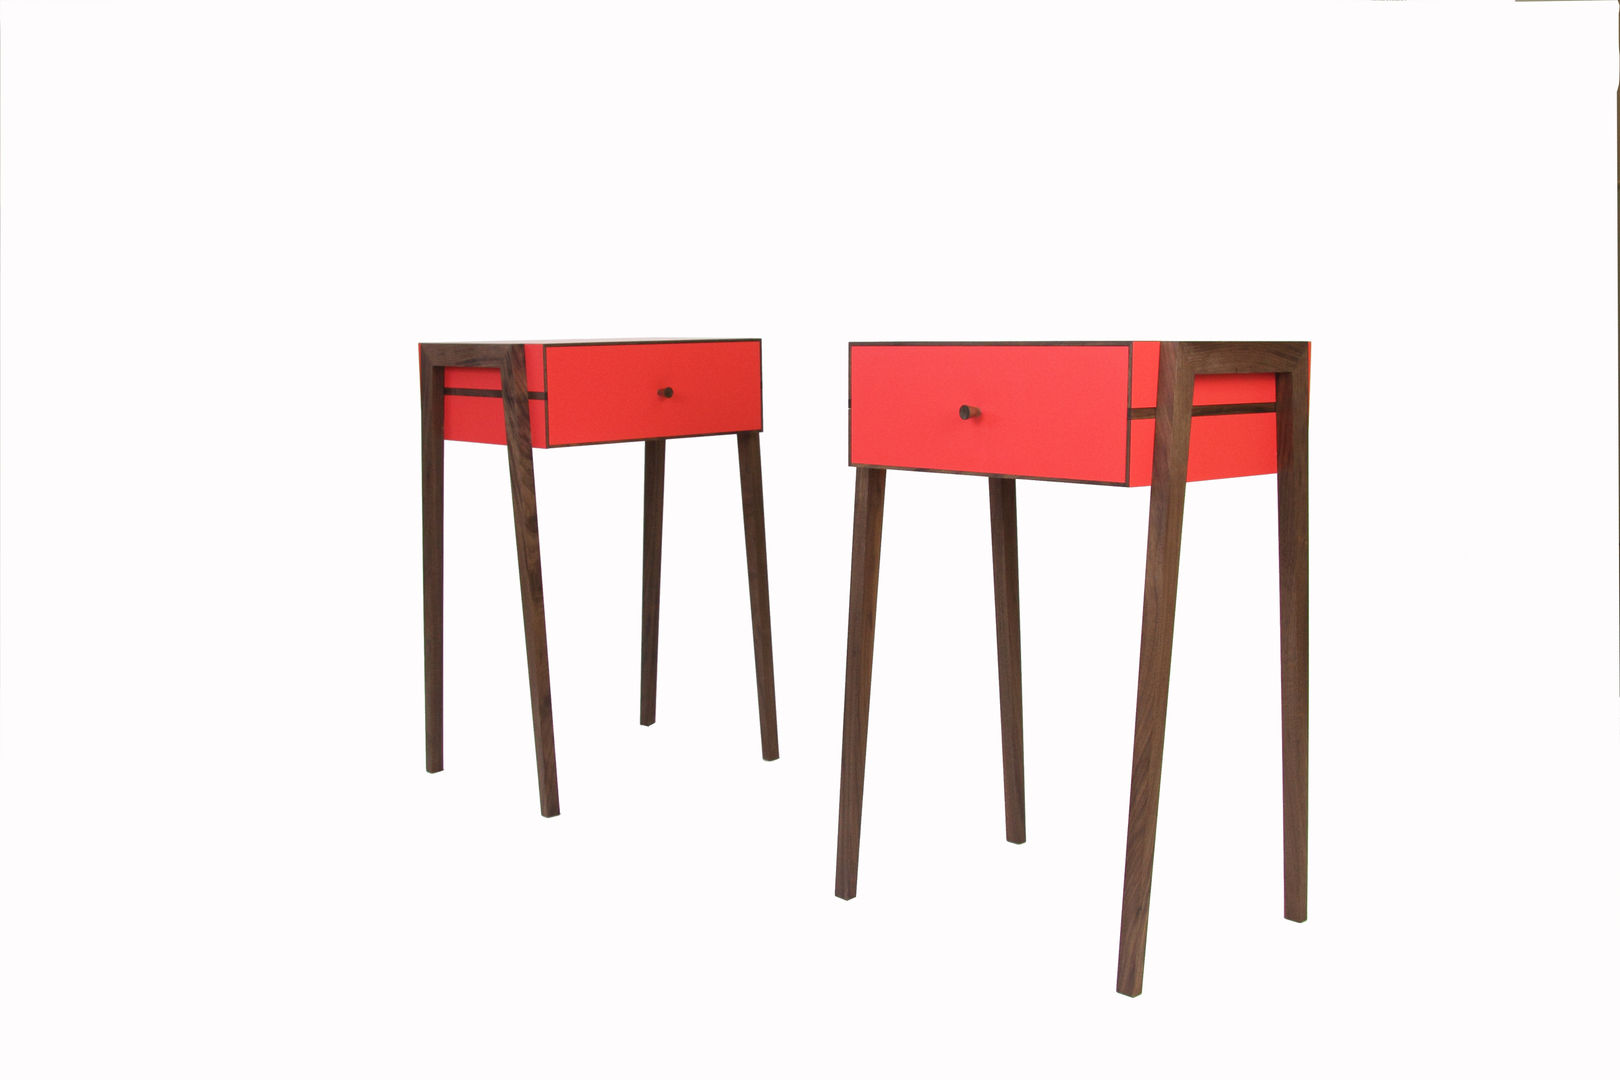 Animate Bedside Table in Red Formica and Walnut Young & Norgate غرفة نوم منضدة جانبية